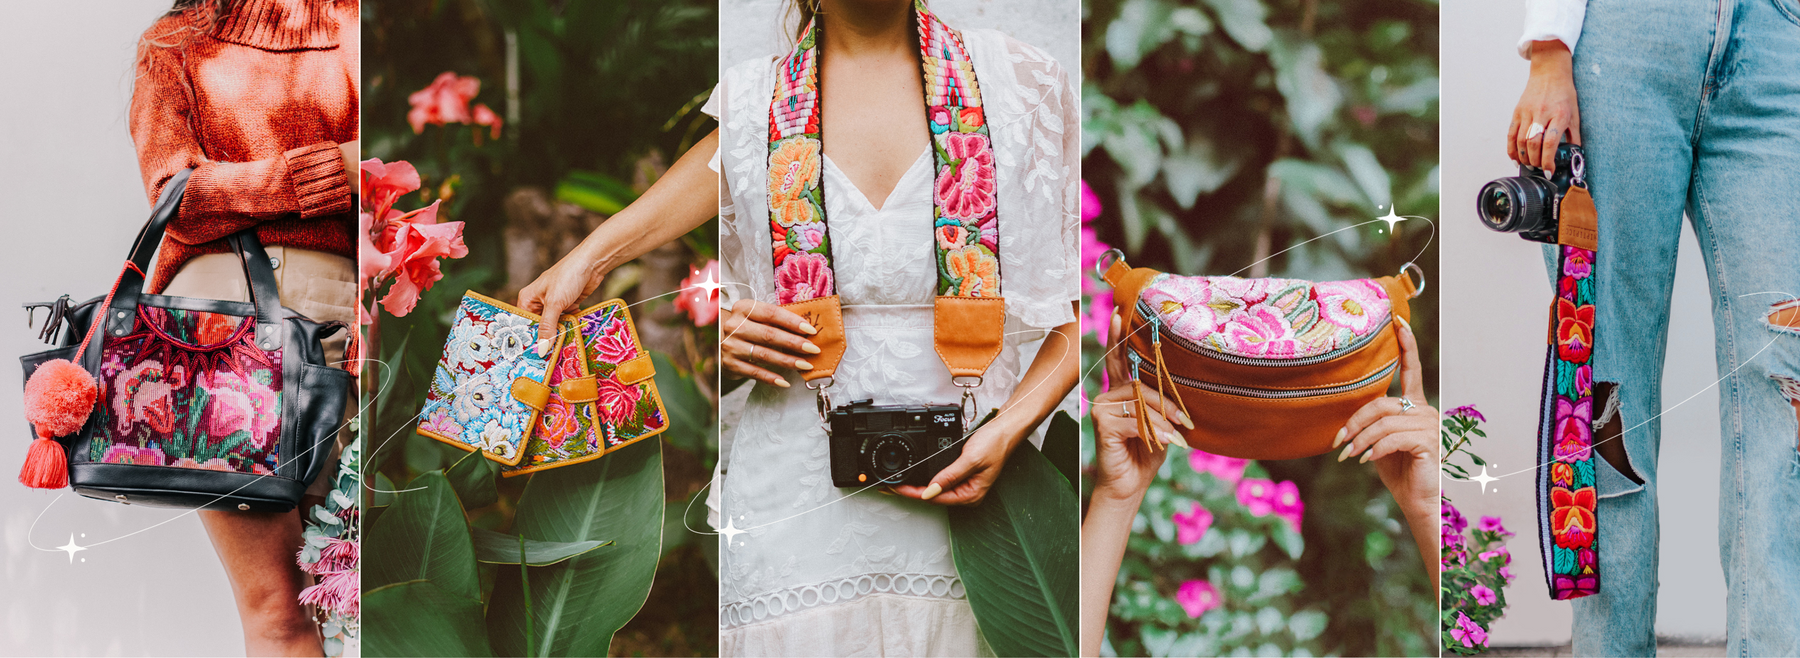 Hiptipico Shop All Ethical Handmade Products from Guatemala